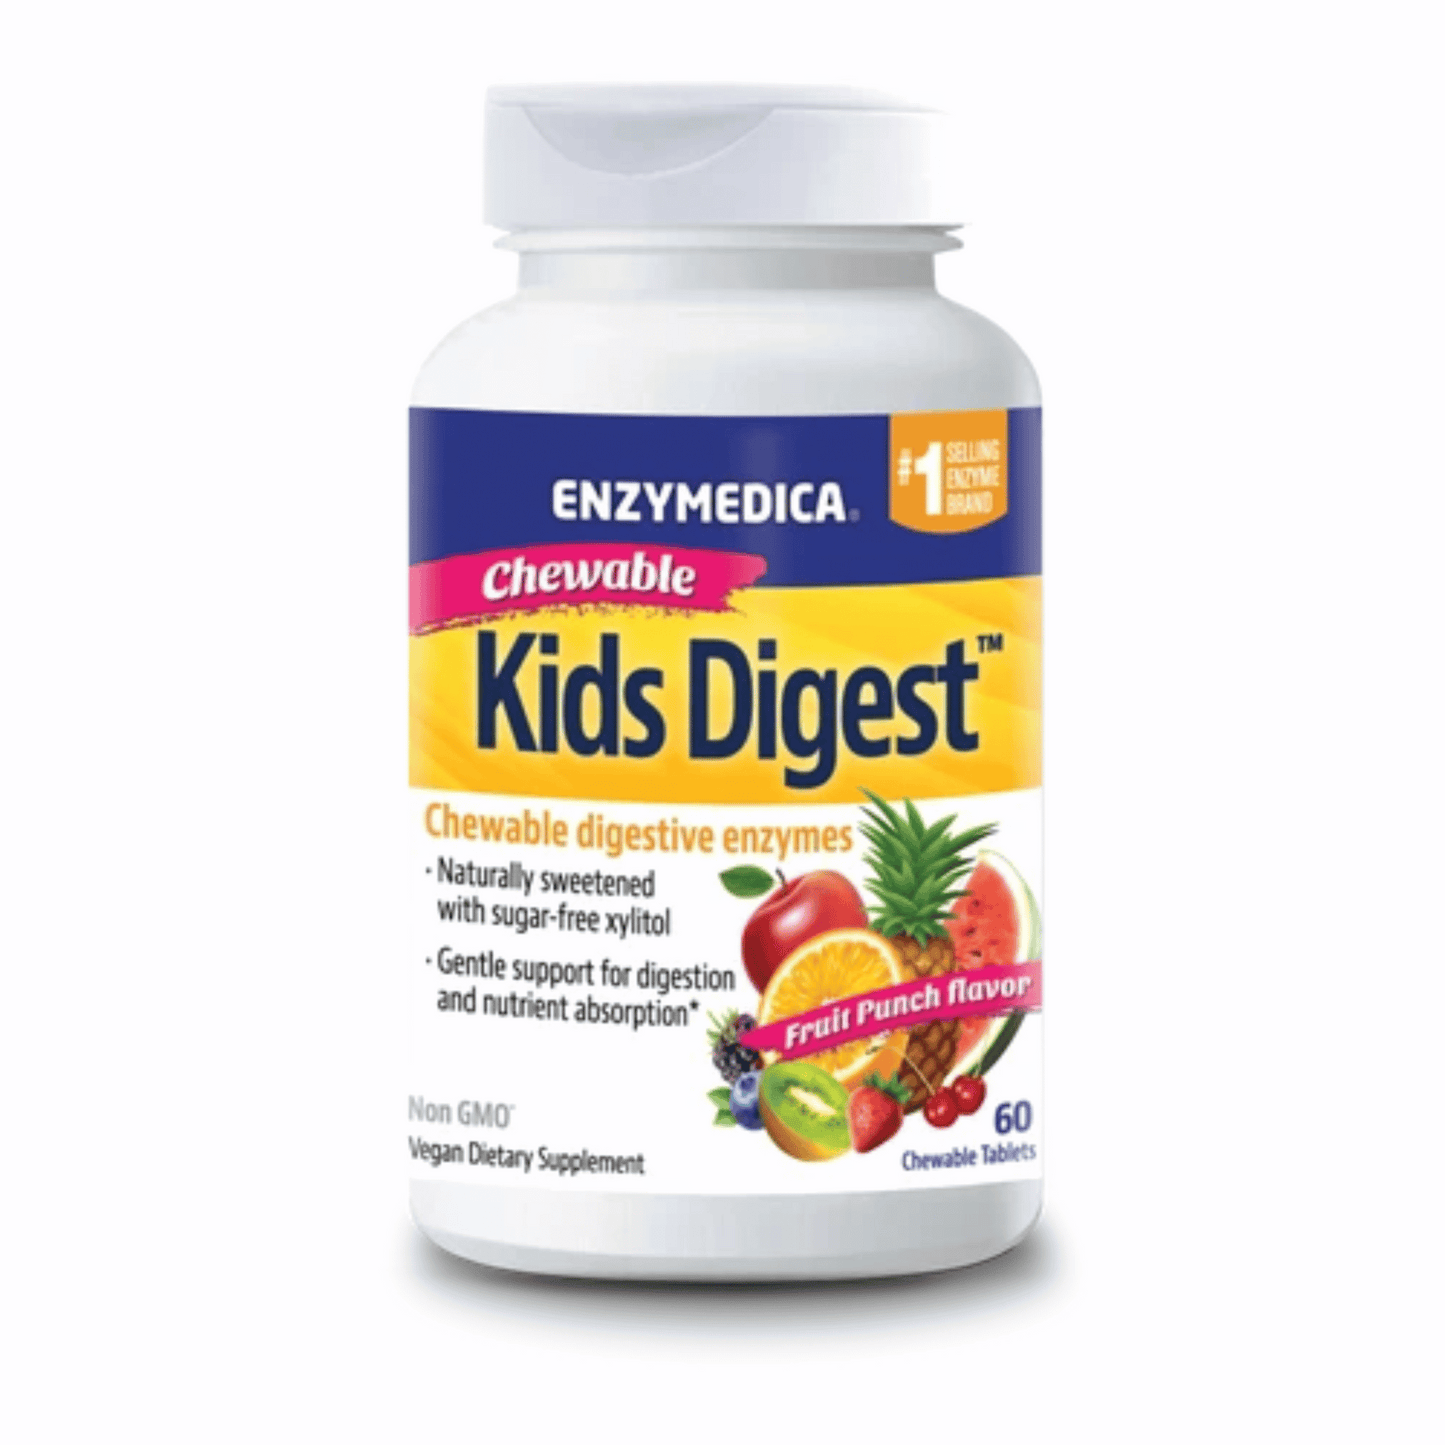 Primary Image of Kids Digest Chewable Tablets